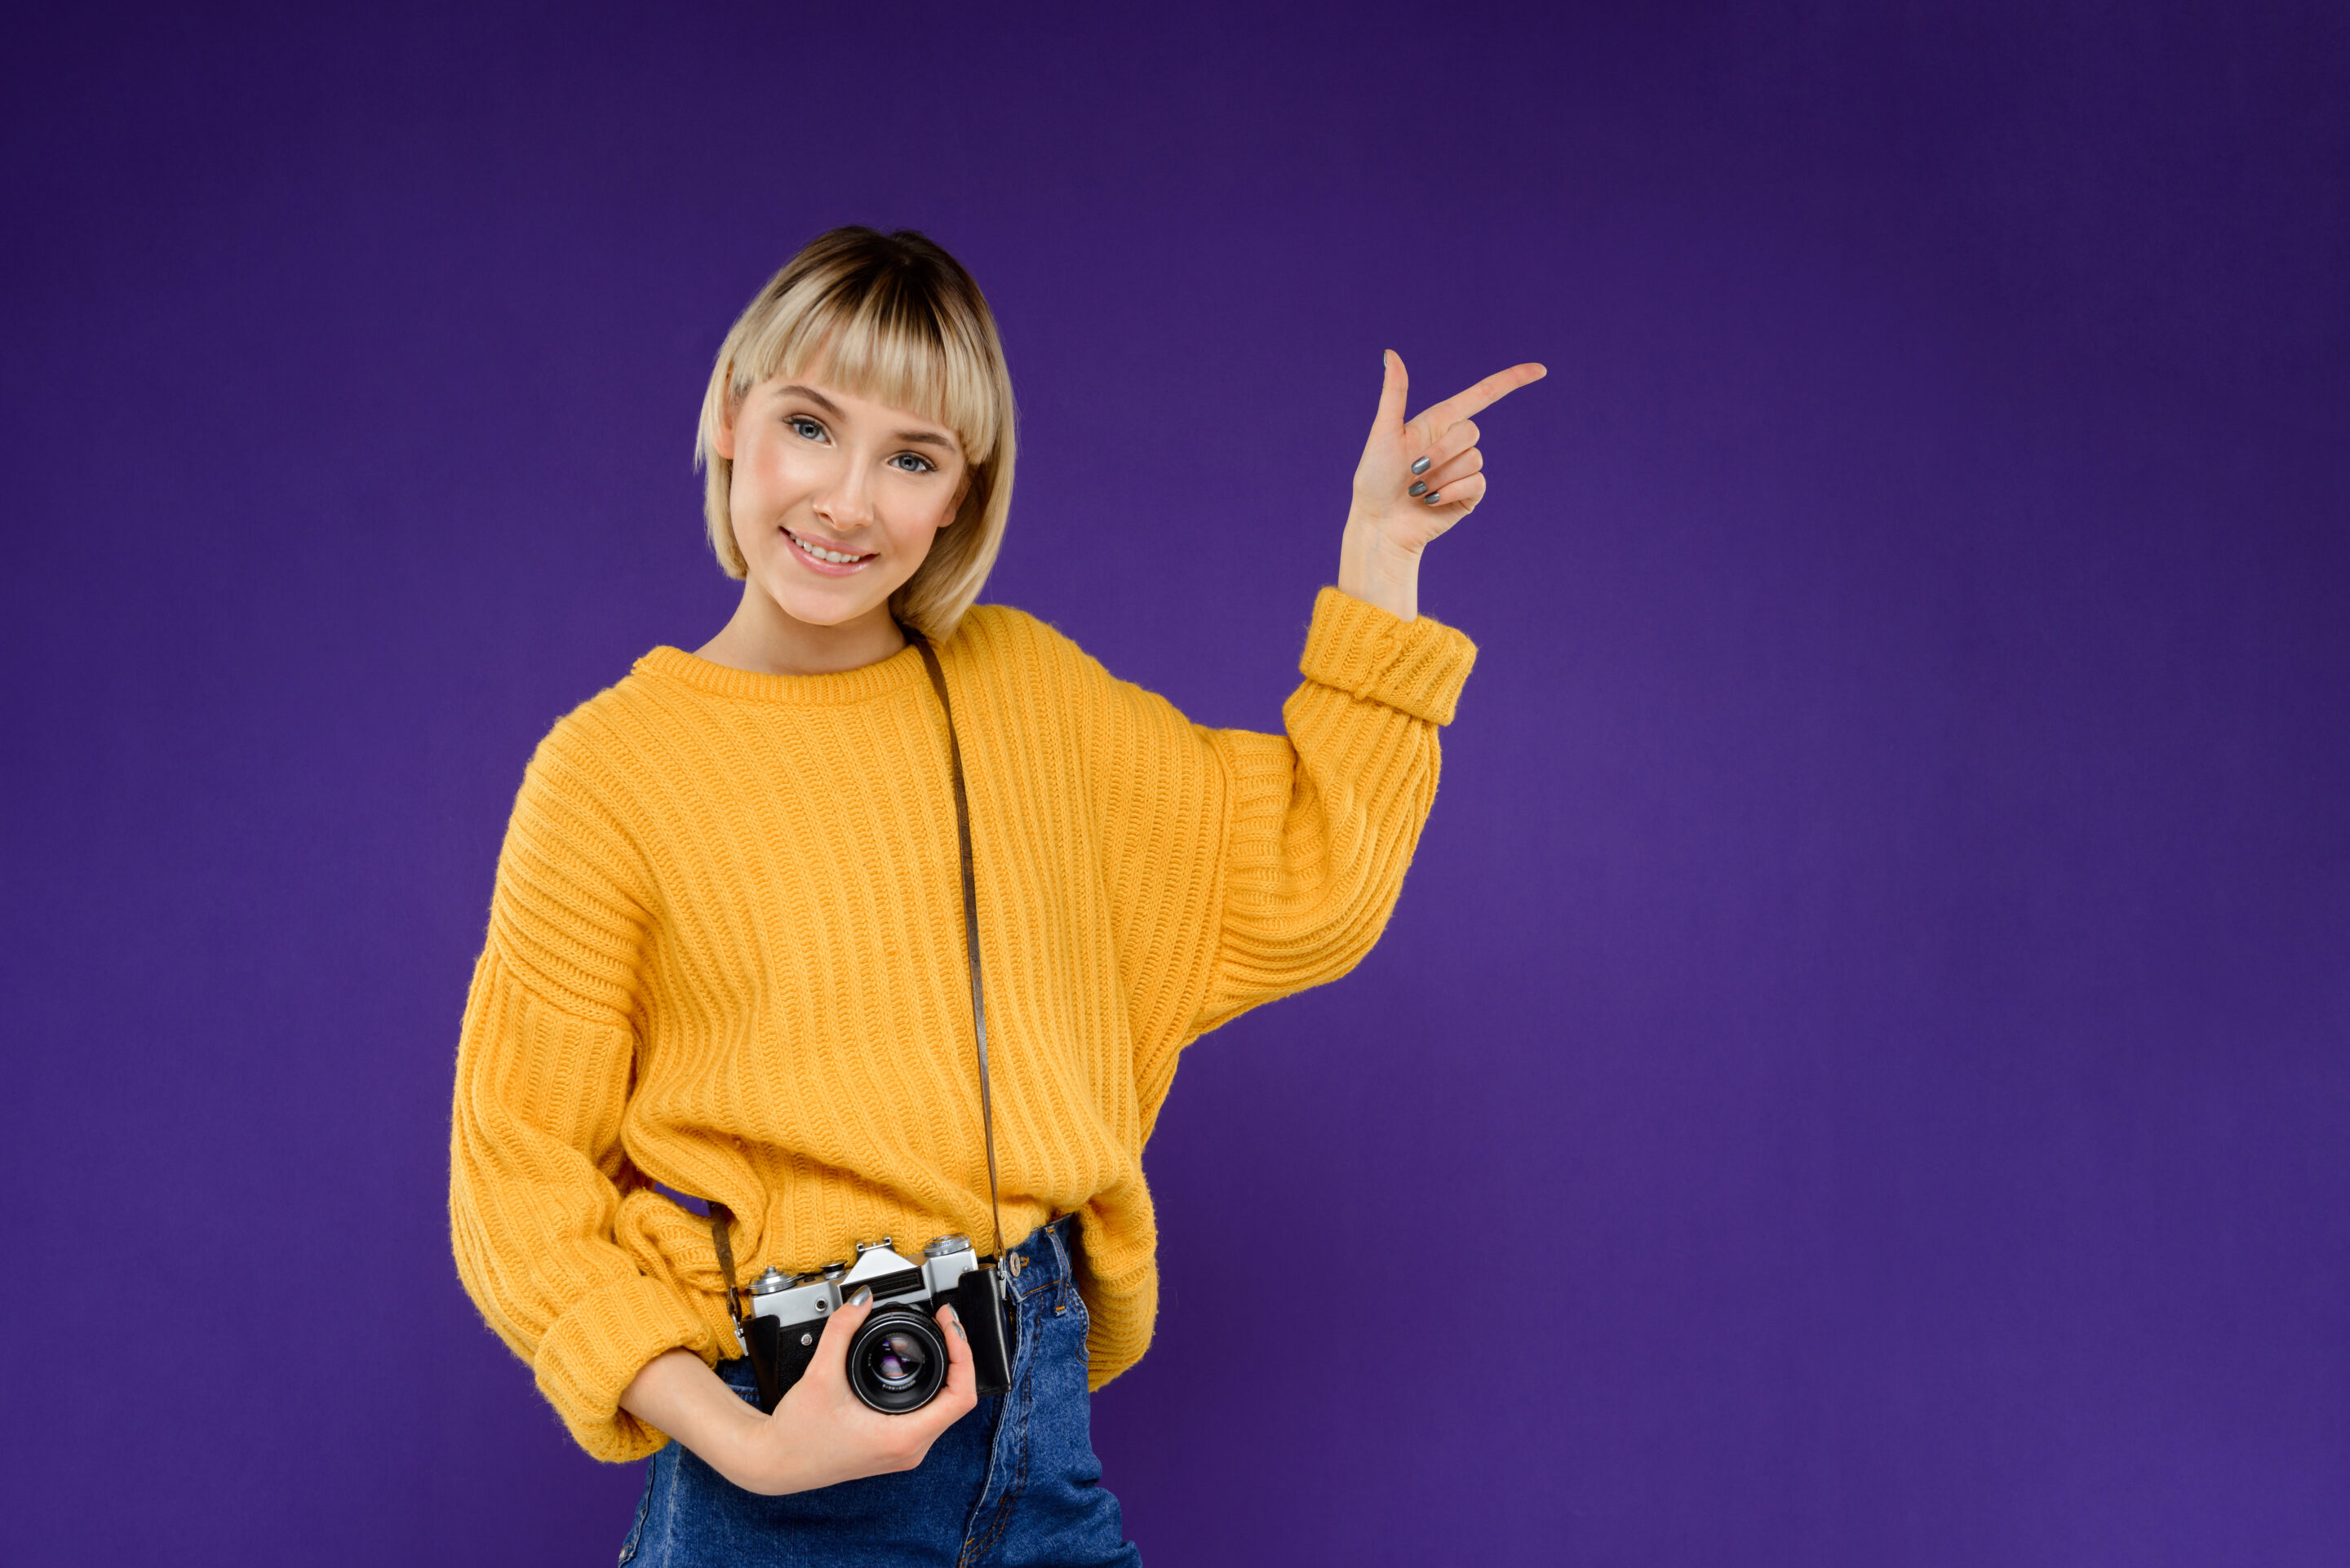 Close-up portrait of a young girl in a yellow sweater pointing with her finger on a purple background